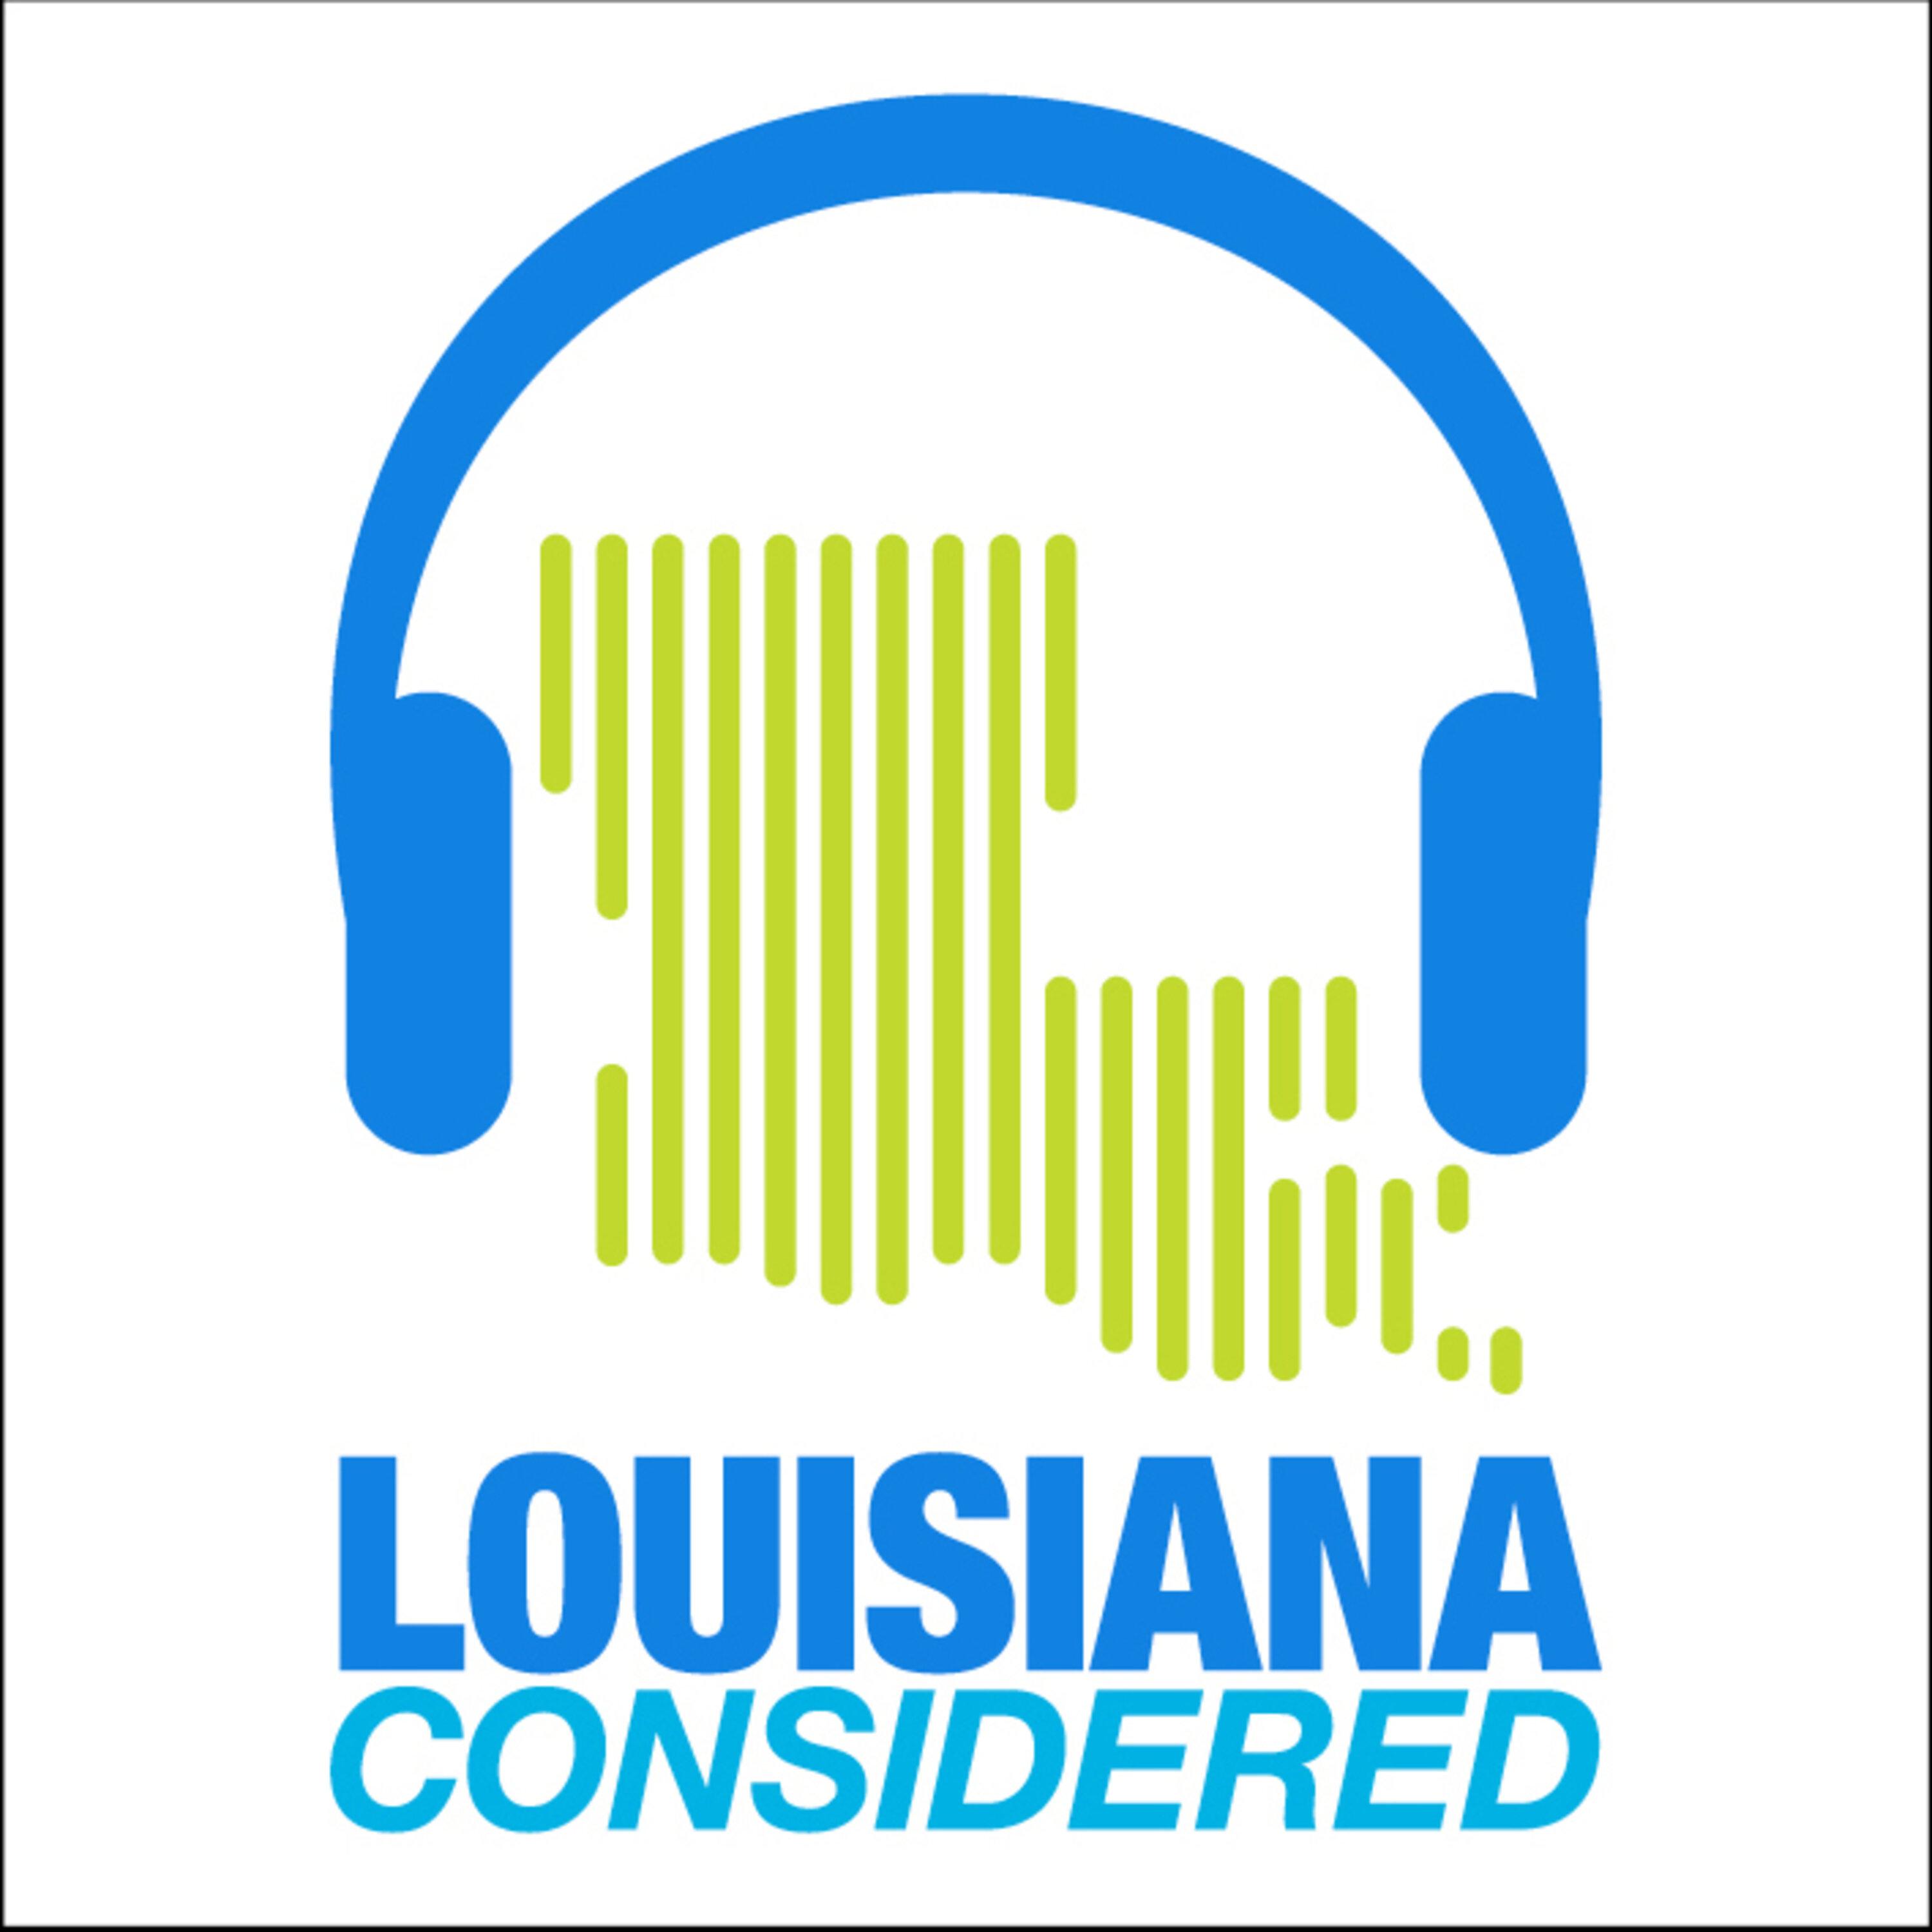 Thumbnail for "Louisiana Considered: Update On Louisiana Vaccinations, Stormy Weather In New Orleans, National WWII Museum Hosts Virtual Field Trip".